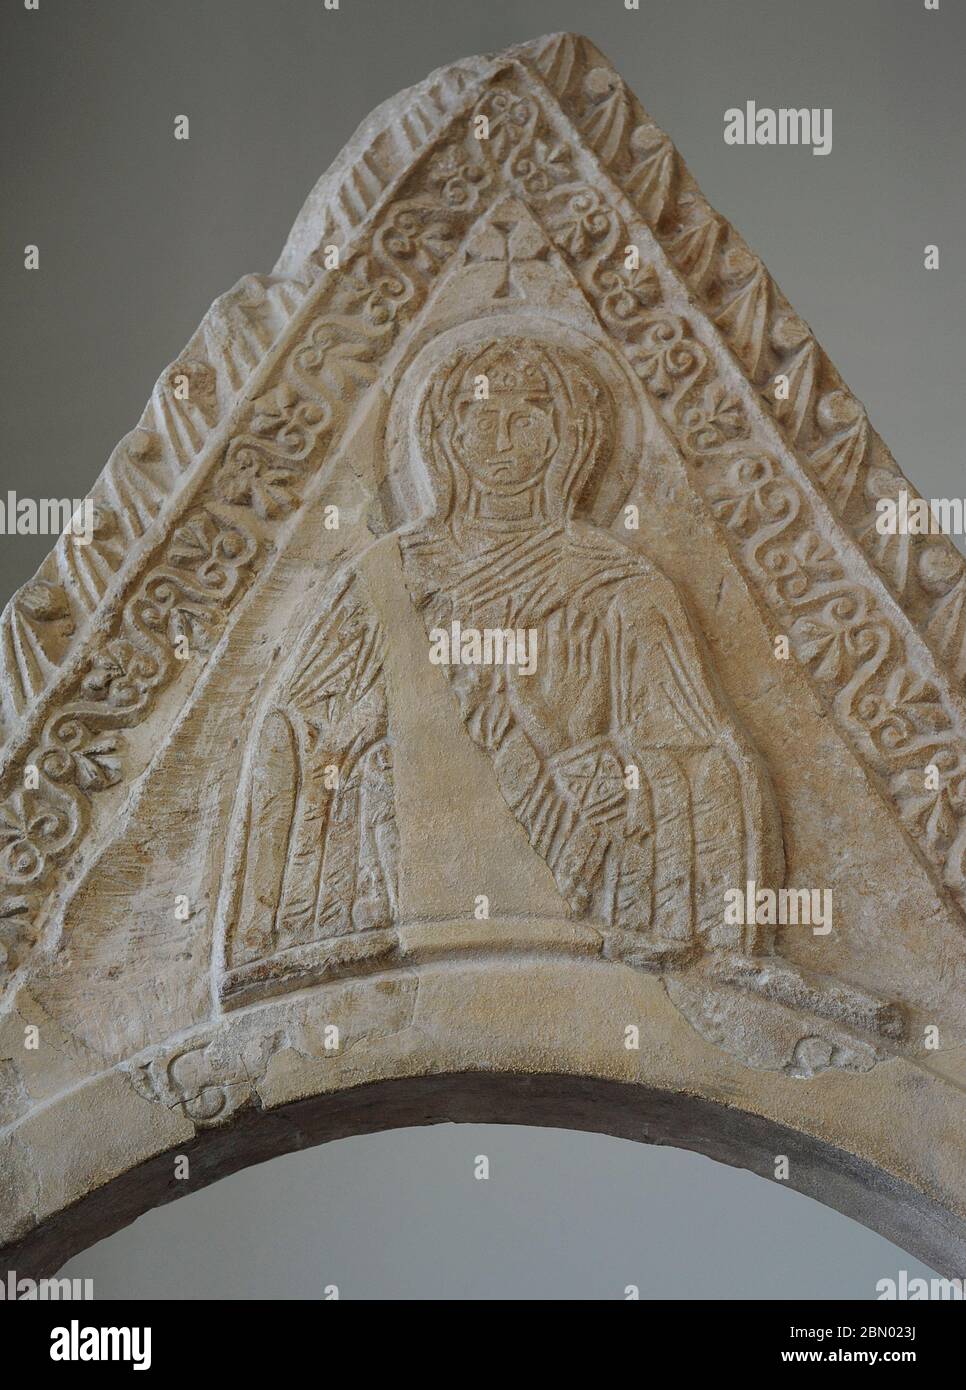 Pediment with figure of the Madonna. From Biskupija, near Knin. 11th century. Croatia. Detail. Museum of Croatian Archaeological Monuments, Split, Croatia. Stock Photo